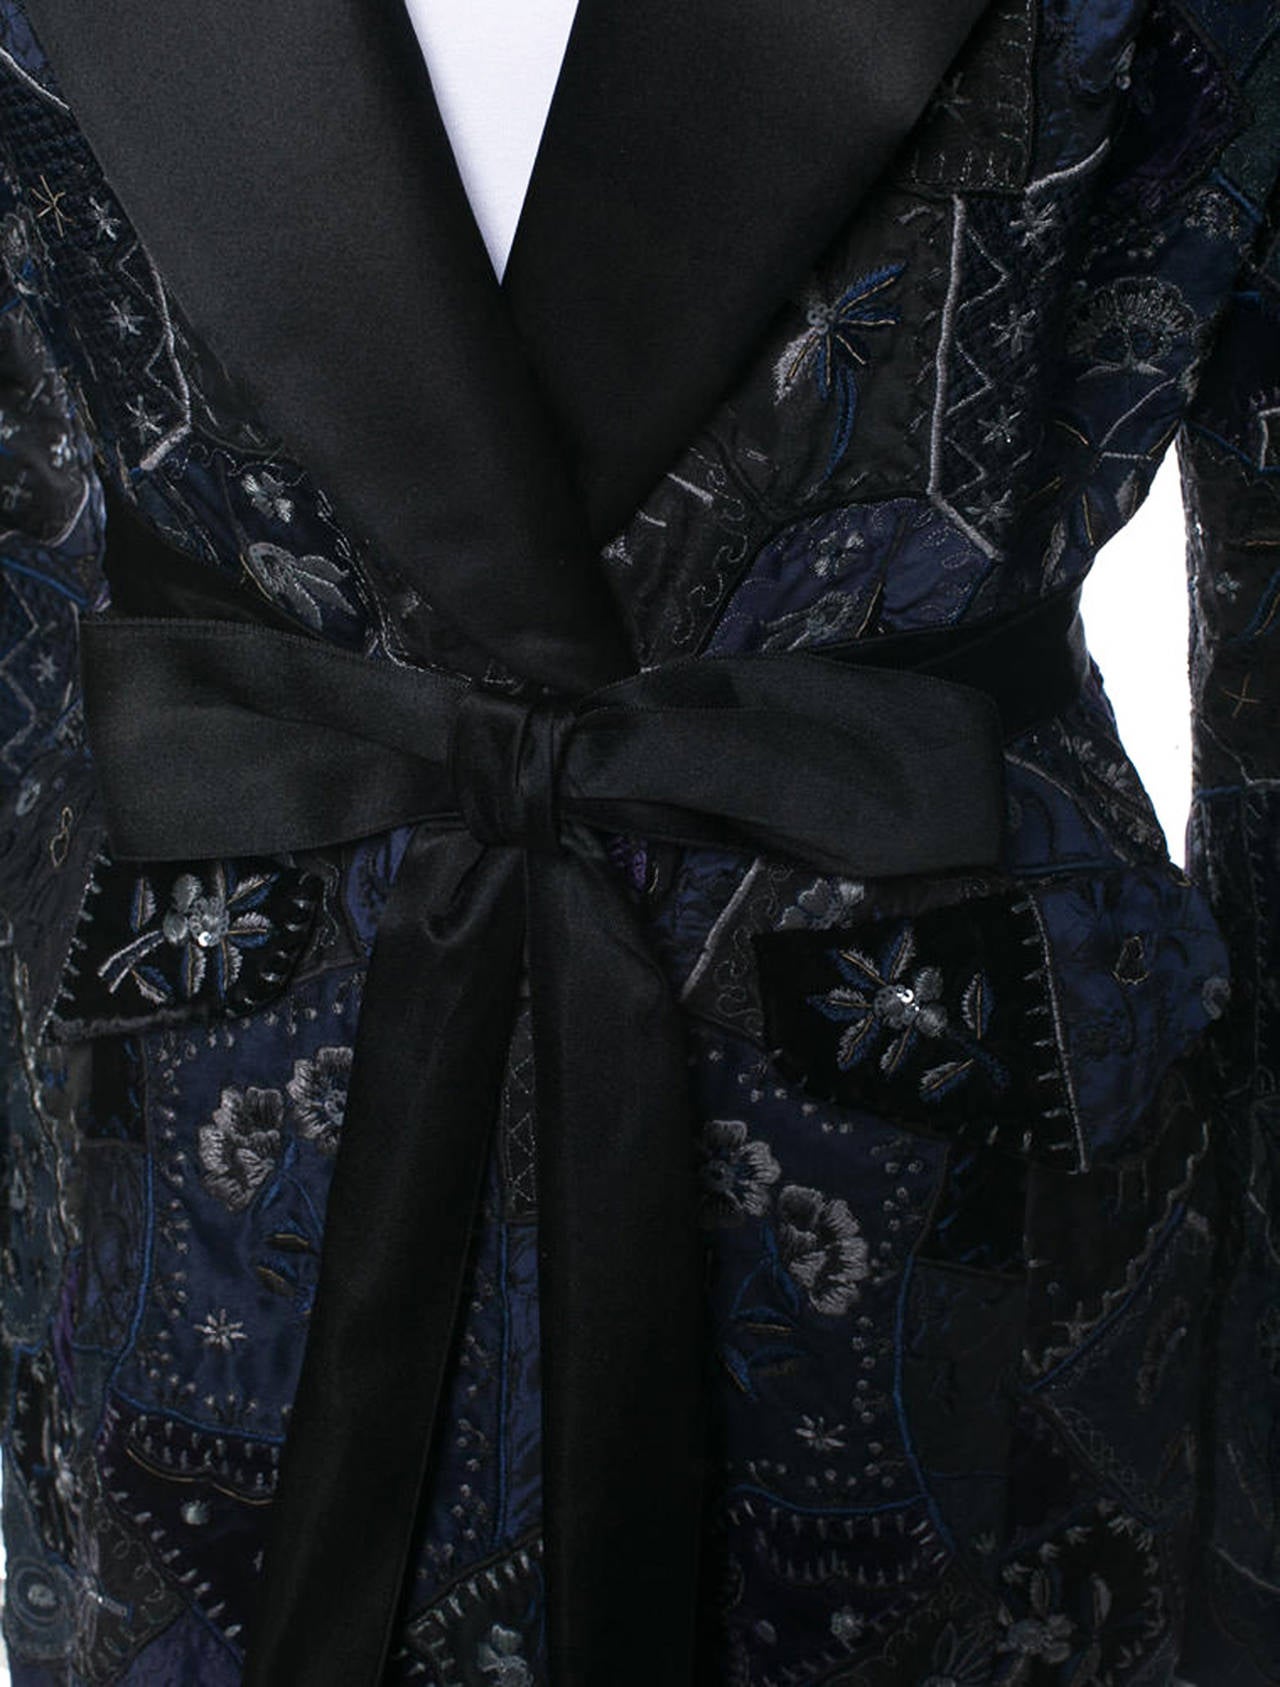 New OSCAR DE LA RENTA SILK PATCHWORK LONG COAT WITH BELT
DESIGNER SIZE 12
COLORS: MIDNIGHT BLUE, BLACK, GRAY

METALLIC THREAD EMBROIDERY
SEQUIN EMBELLISHED
SHAWL SATIN COLLAR
TWO FRONT FLAP POCKETS
SATIN BOW WAIST BELT 
FRONT BUTTON